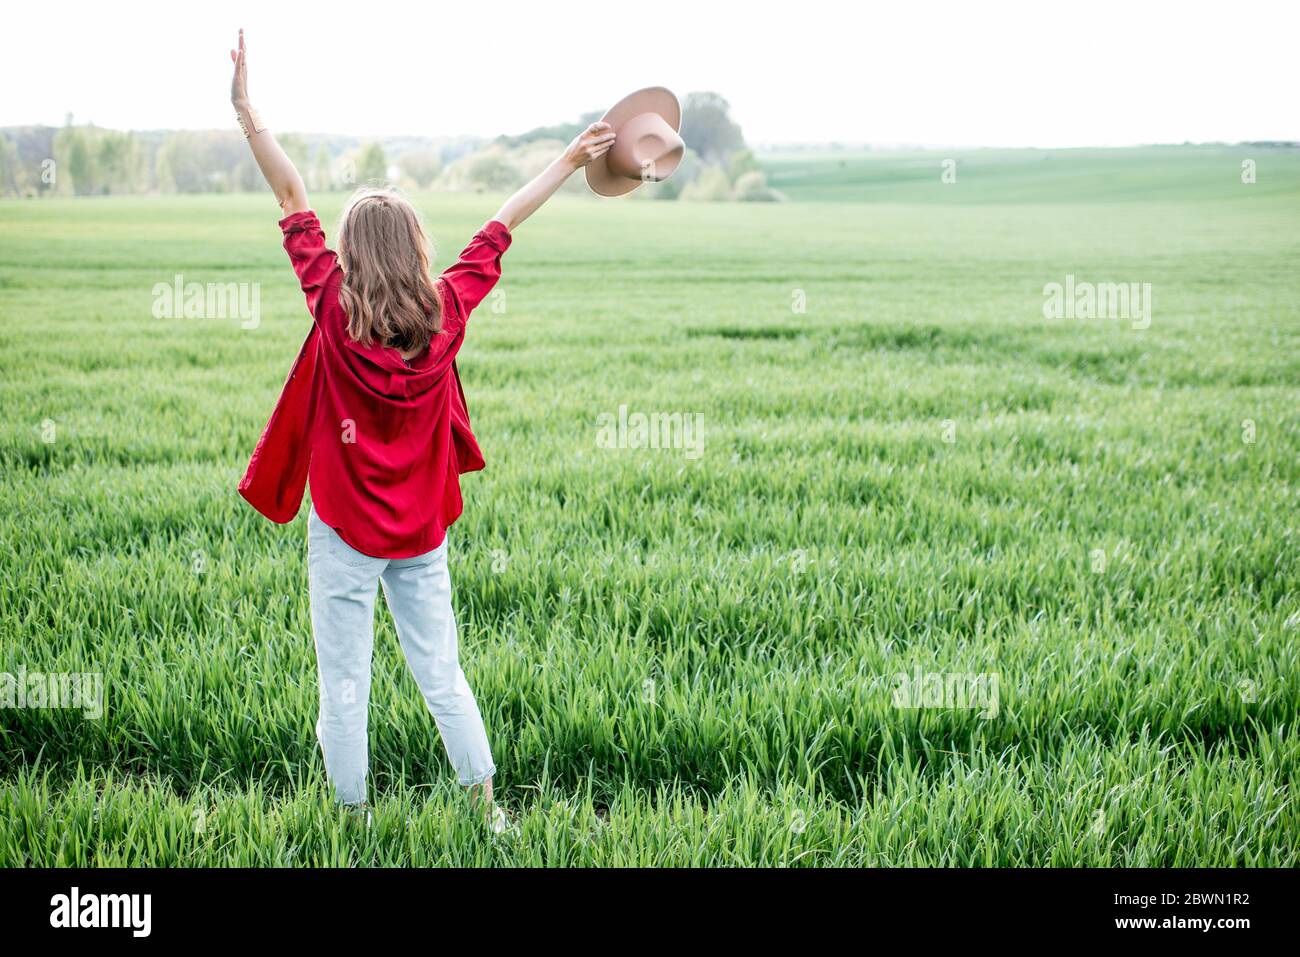 Stylish woman enjoying springtime and nature on the greenfield, back view. Concept of a carefree lifestyle and freedom Stock Photo